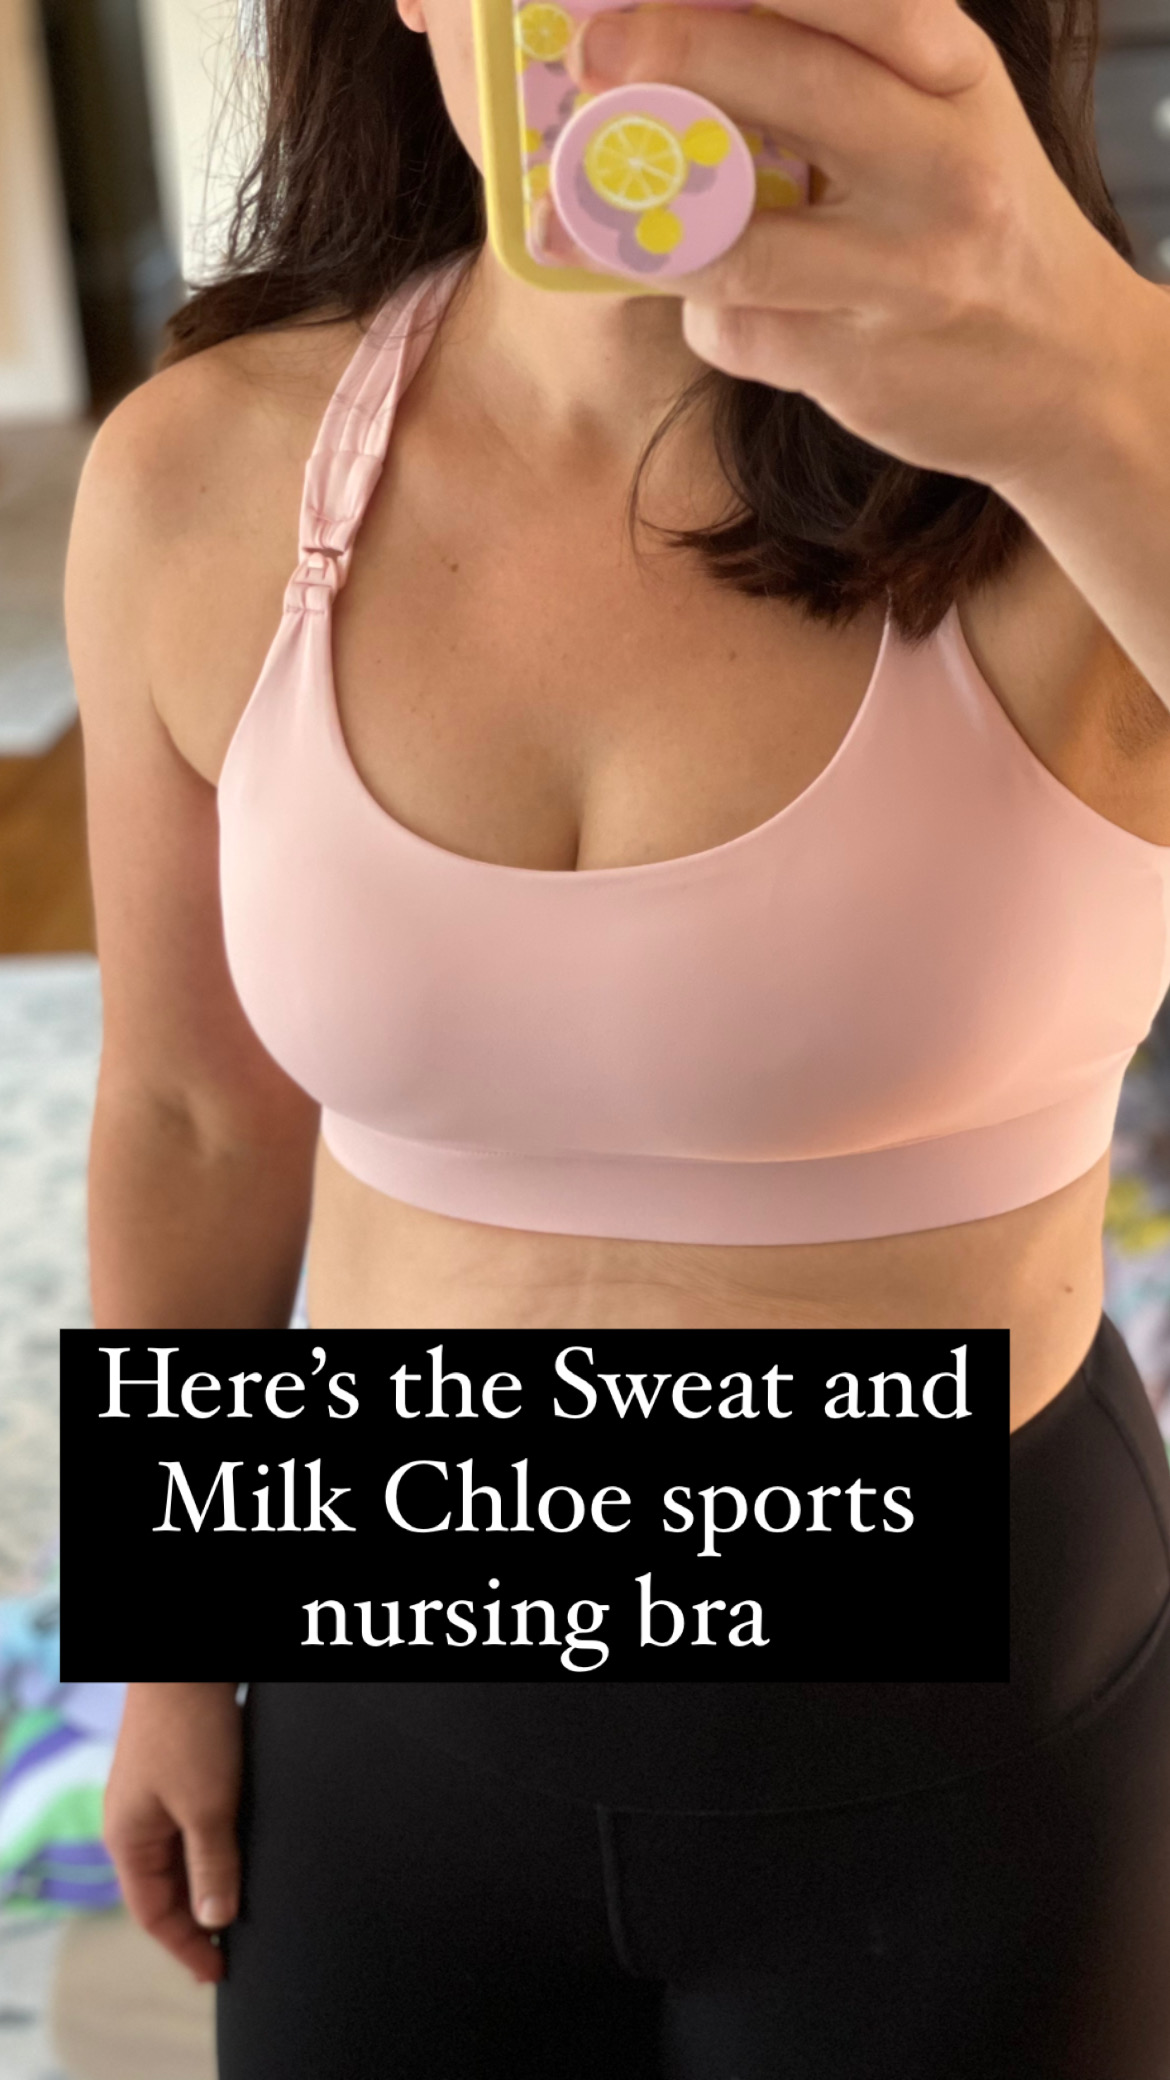 A Woman With Sweat On Her And A Pink Sports Bra. Stock Photo